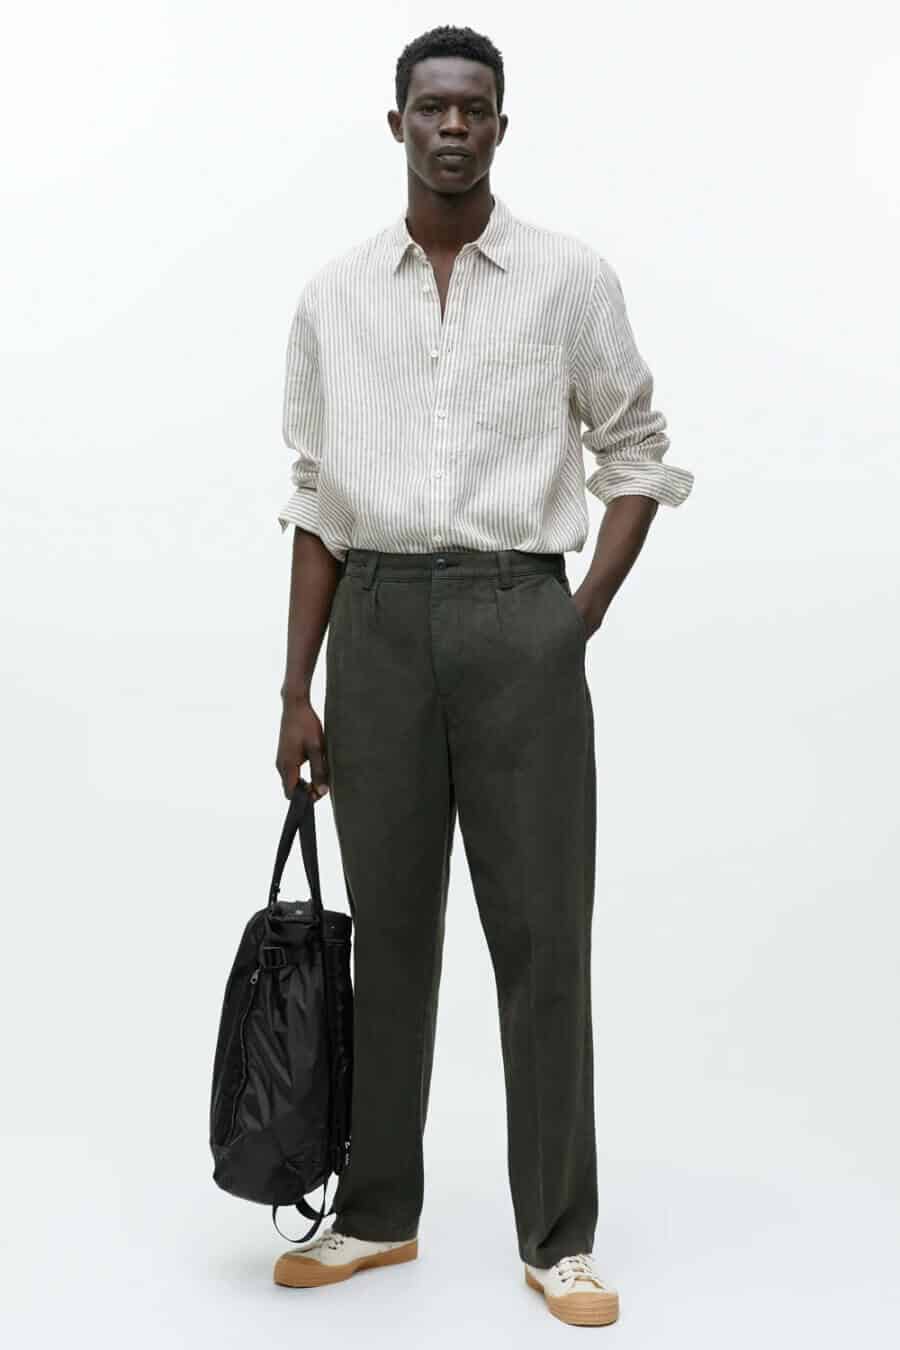 Men's linen shirt and trousers with sneakers business casual outfit